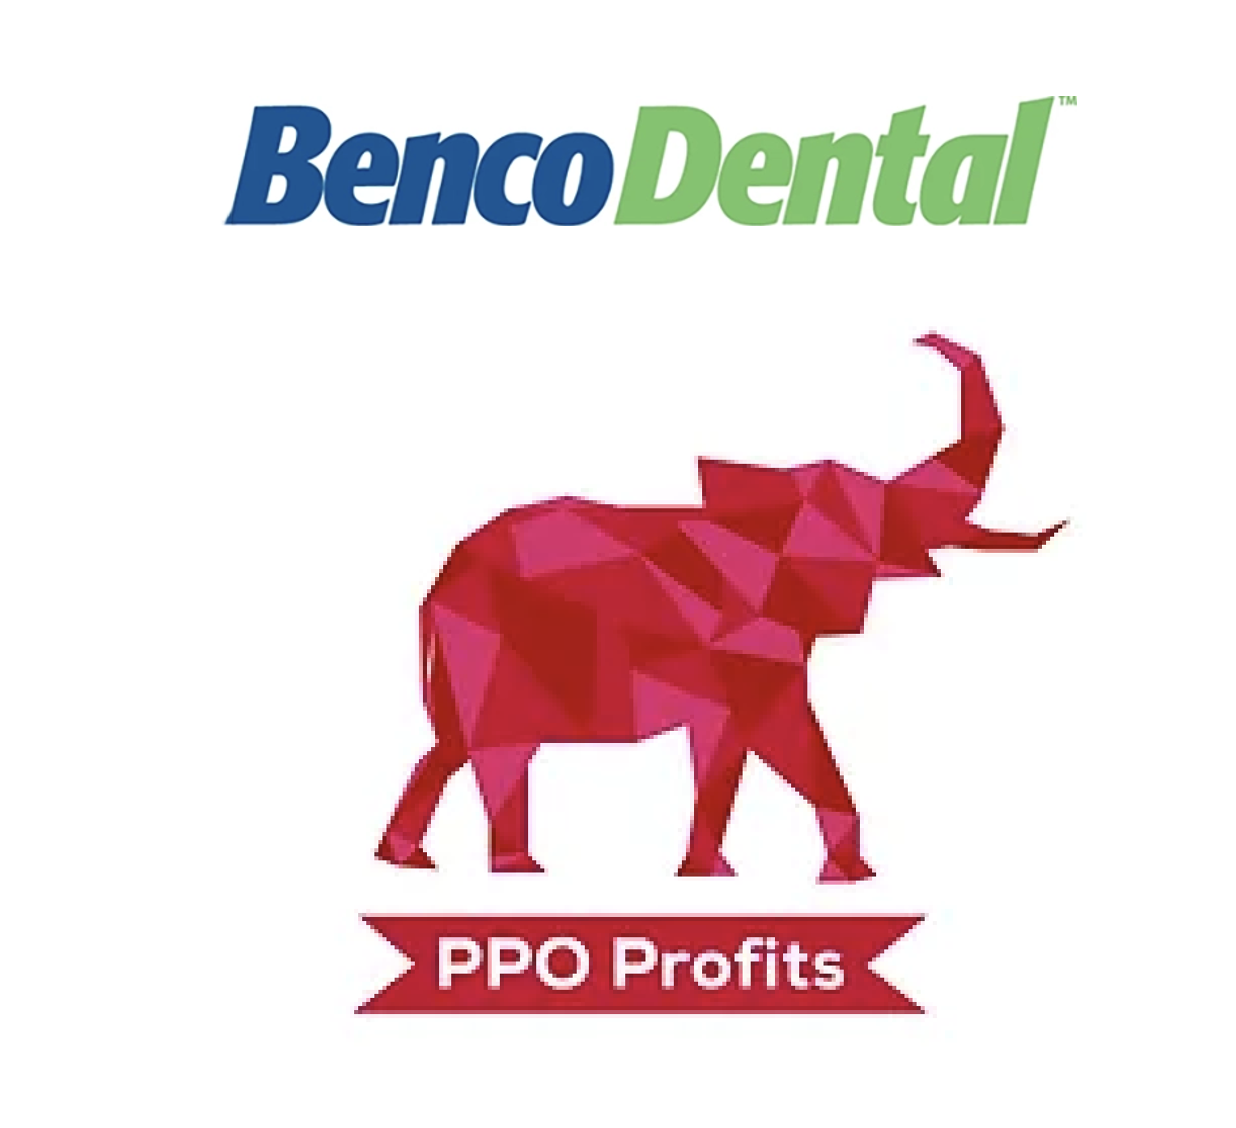 Benco Dental Enhances Service Offering with Acquisition of PPO Profits | Image Credits: © Benco Dental and PPO Profits